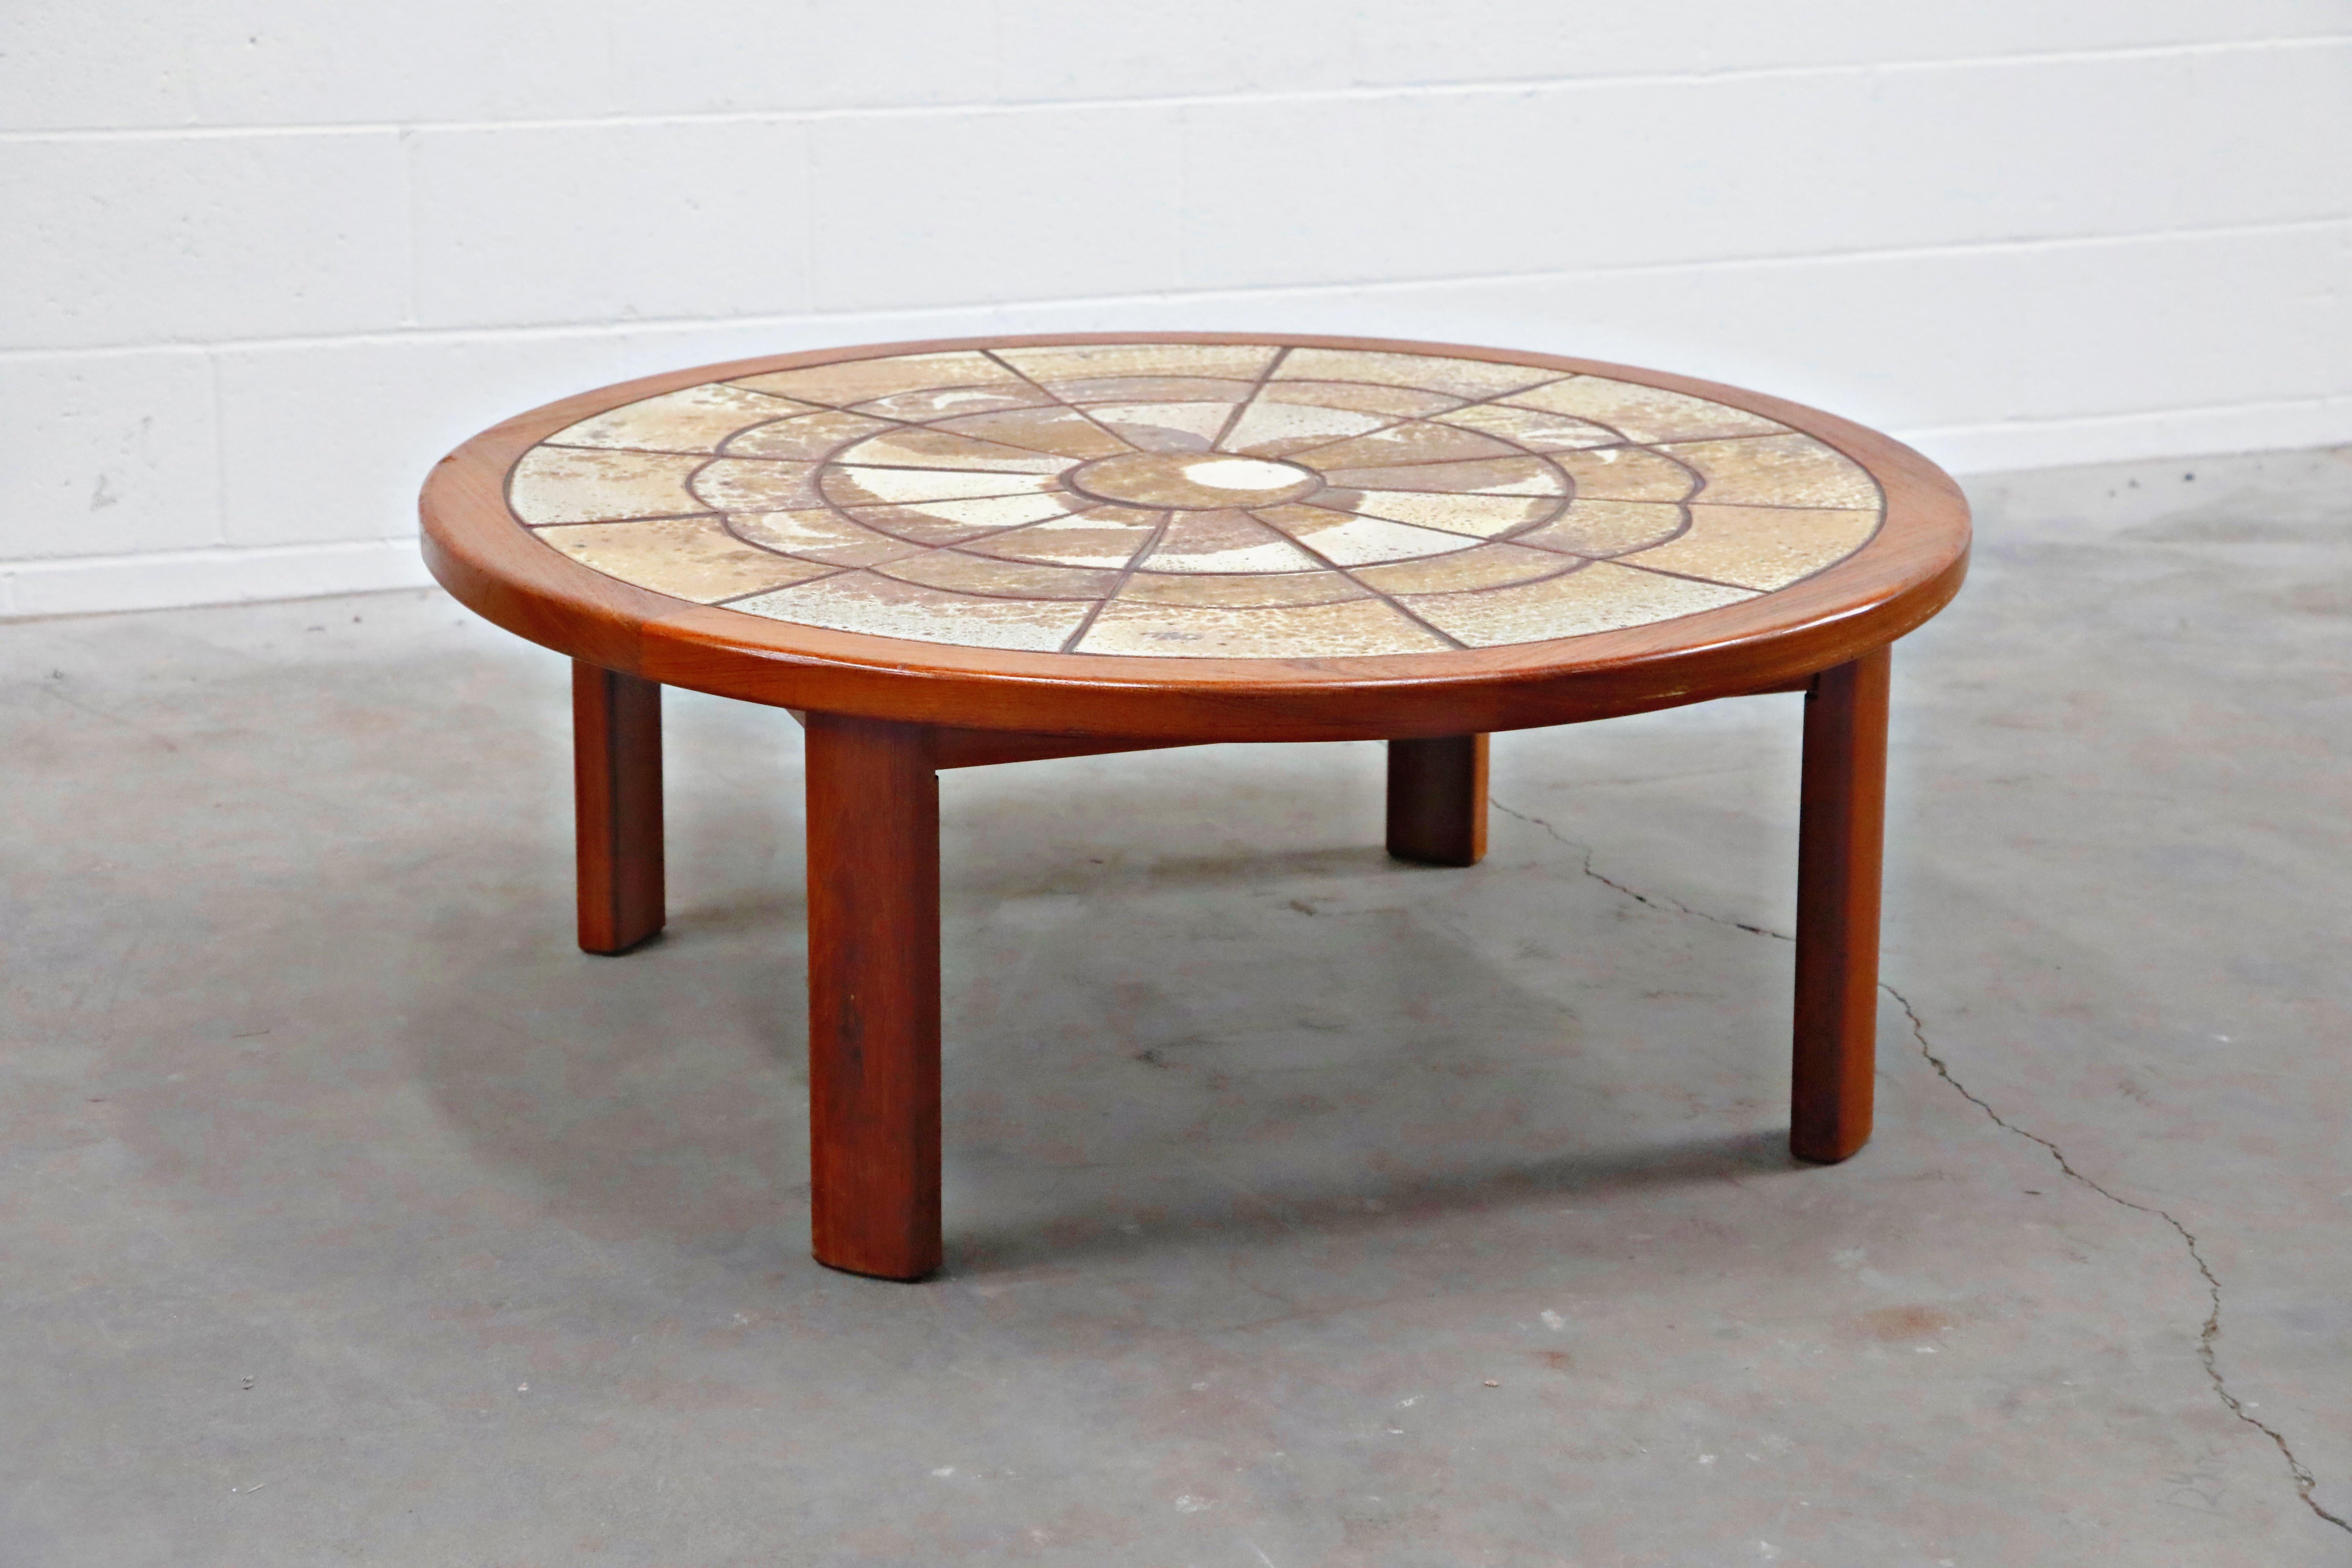 A classy and stylish Tue Poulsen and Roger Capron style Mid-Century Modern teak and ceramic tile coffee table featuring ceramic art tiles inset into a round teak top atop for teak legs. The ceramic tiles are placed in a circular pattern with a cloud